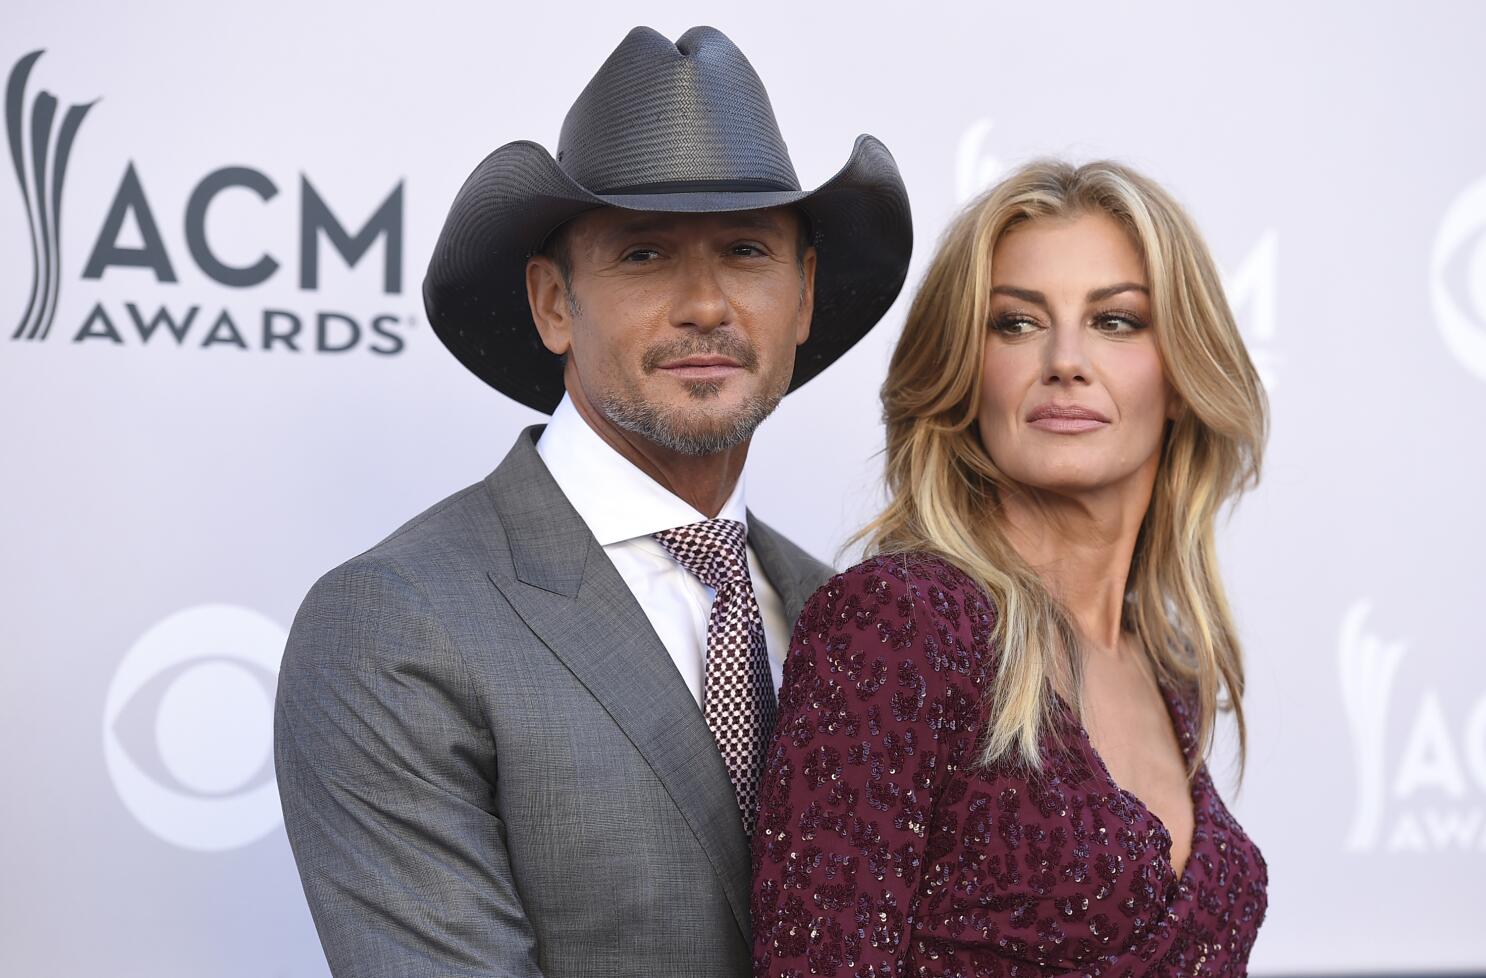 Tim McGraw married Faith Hill after they got busy to this song